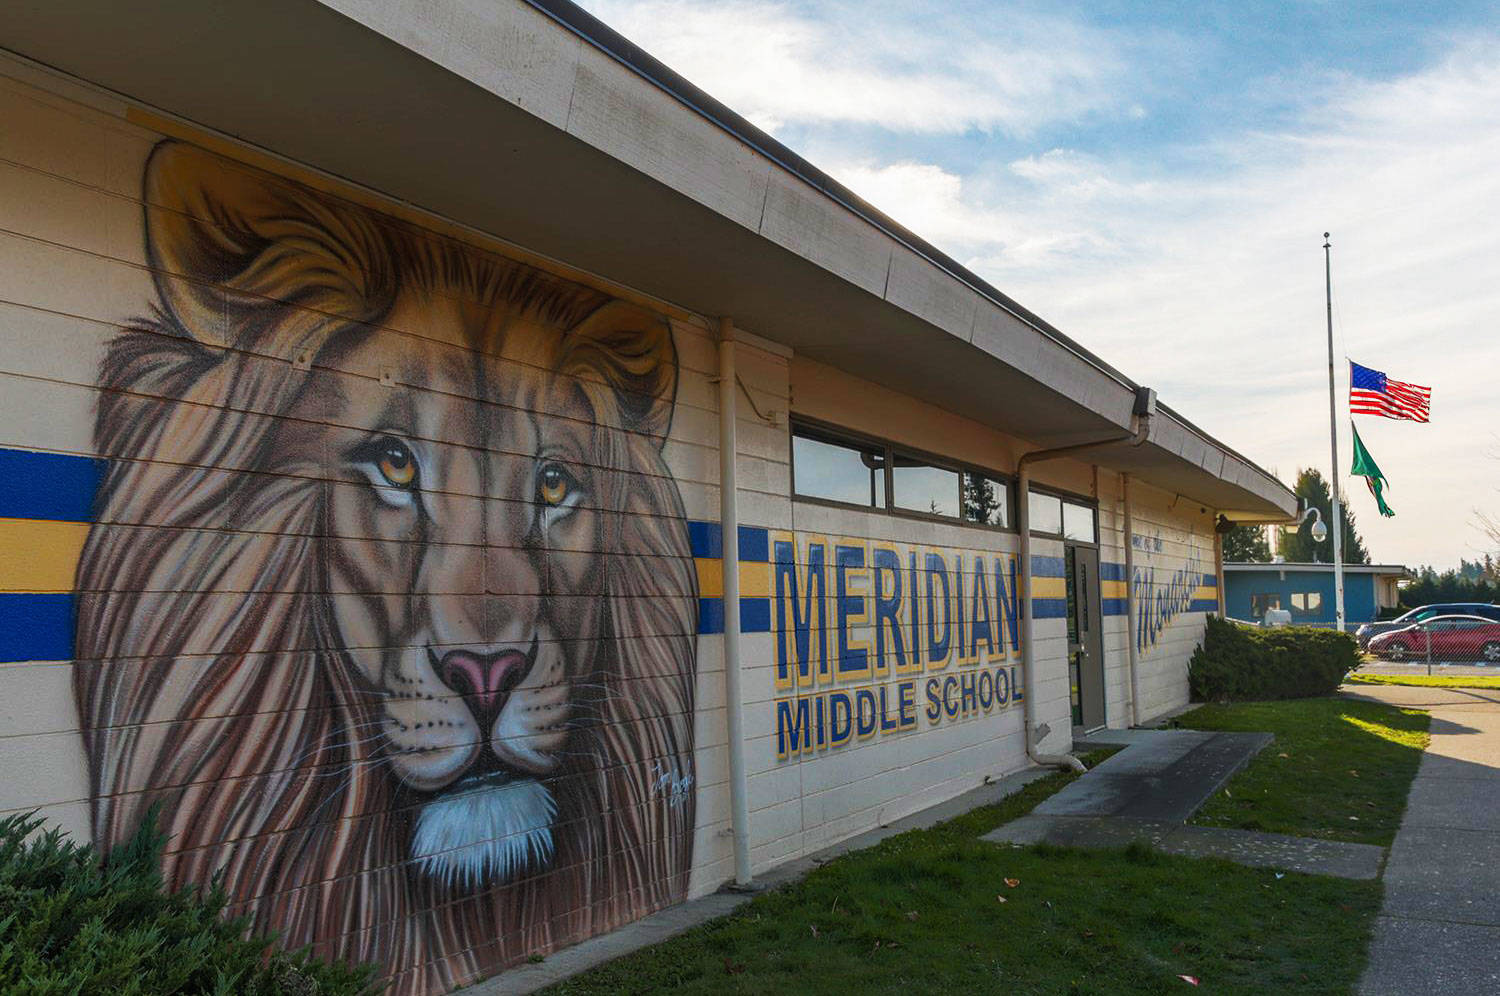 Sixth-grade students might move from elementary schools to Meridian Middle School and other middle schools in Kent under a boundary revision proposal. COURTESY PHOTO, Kent School District